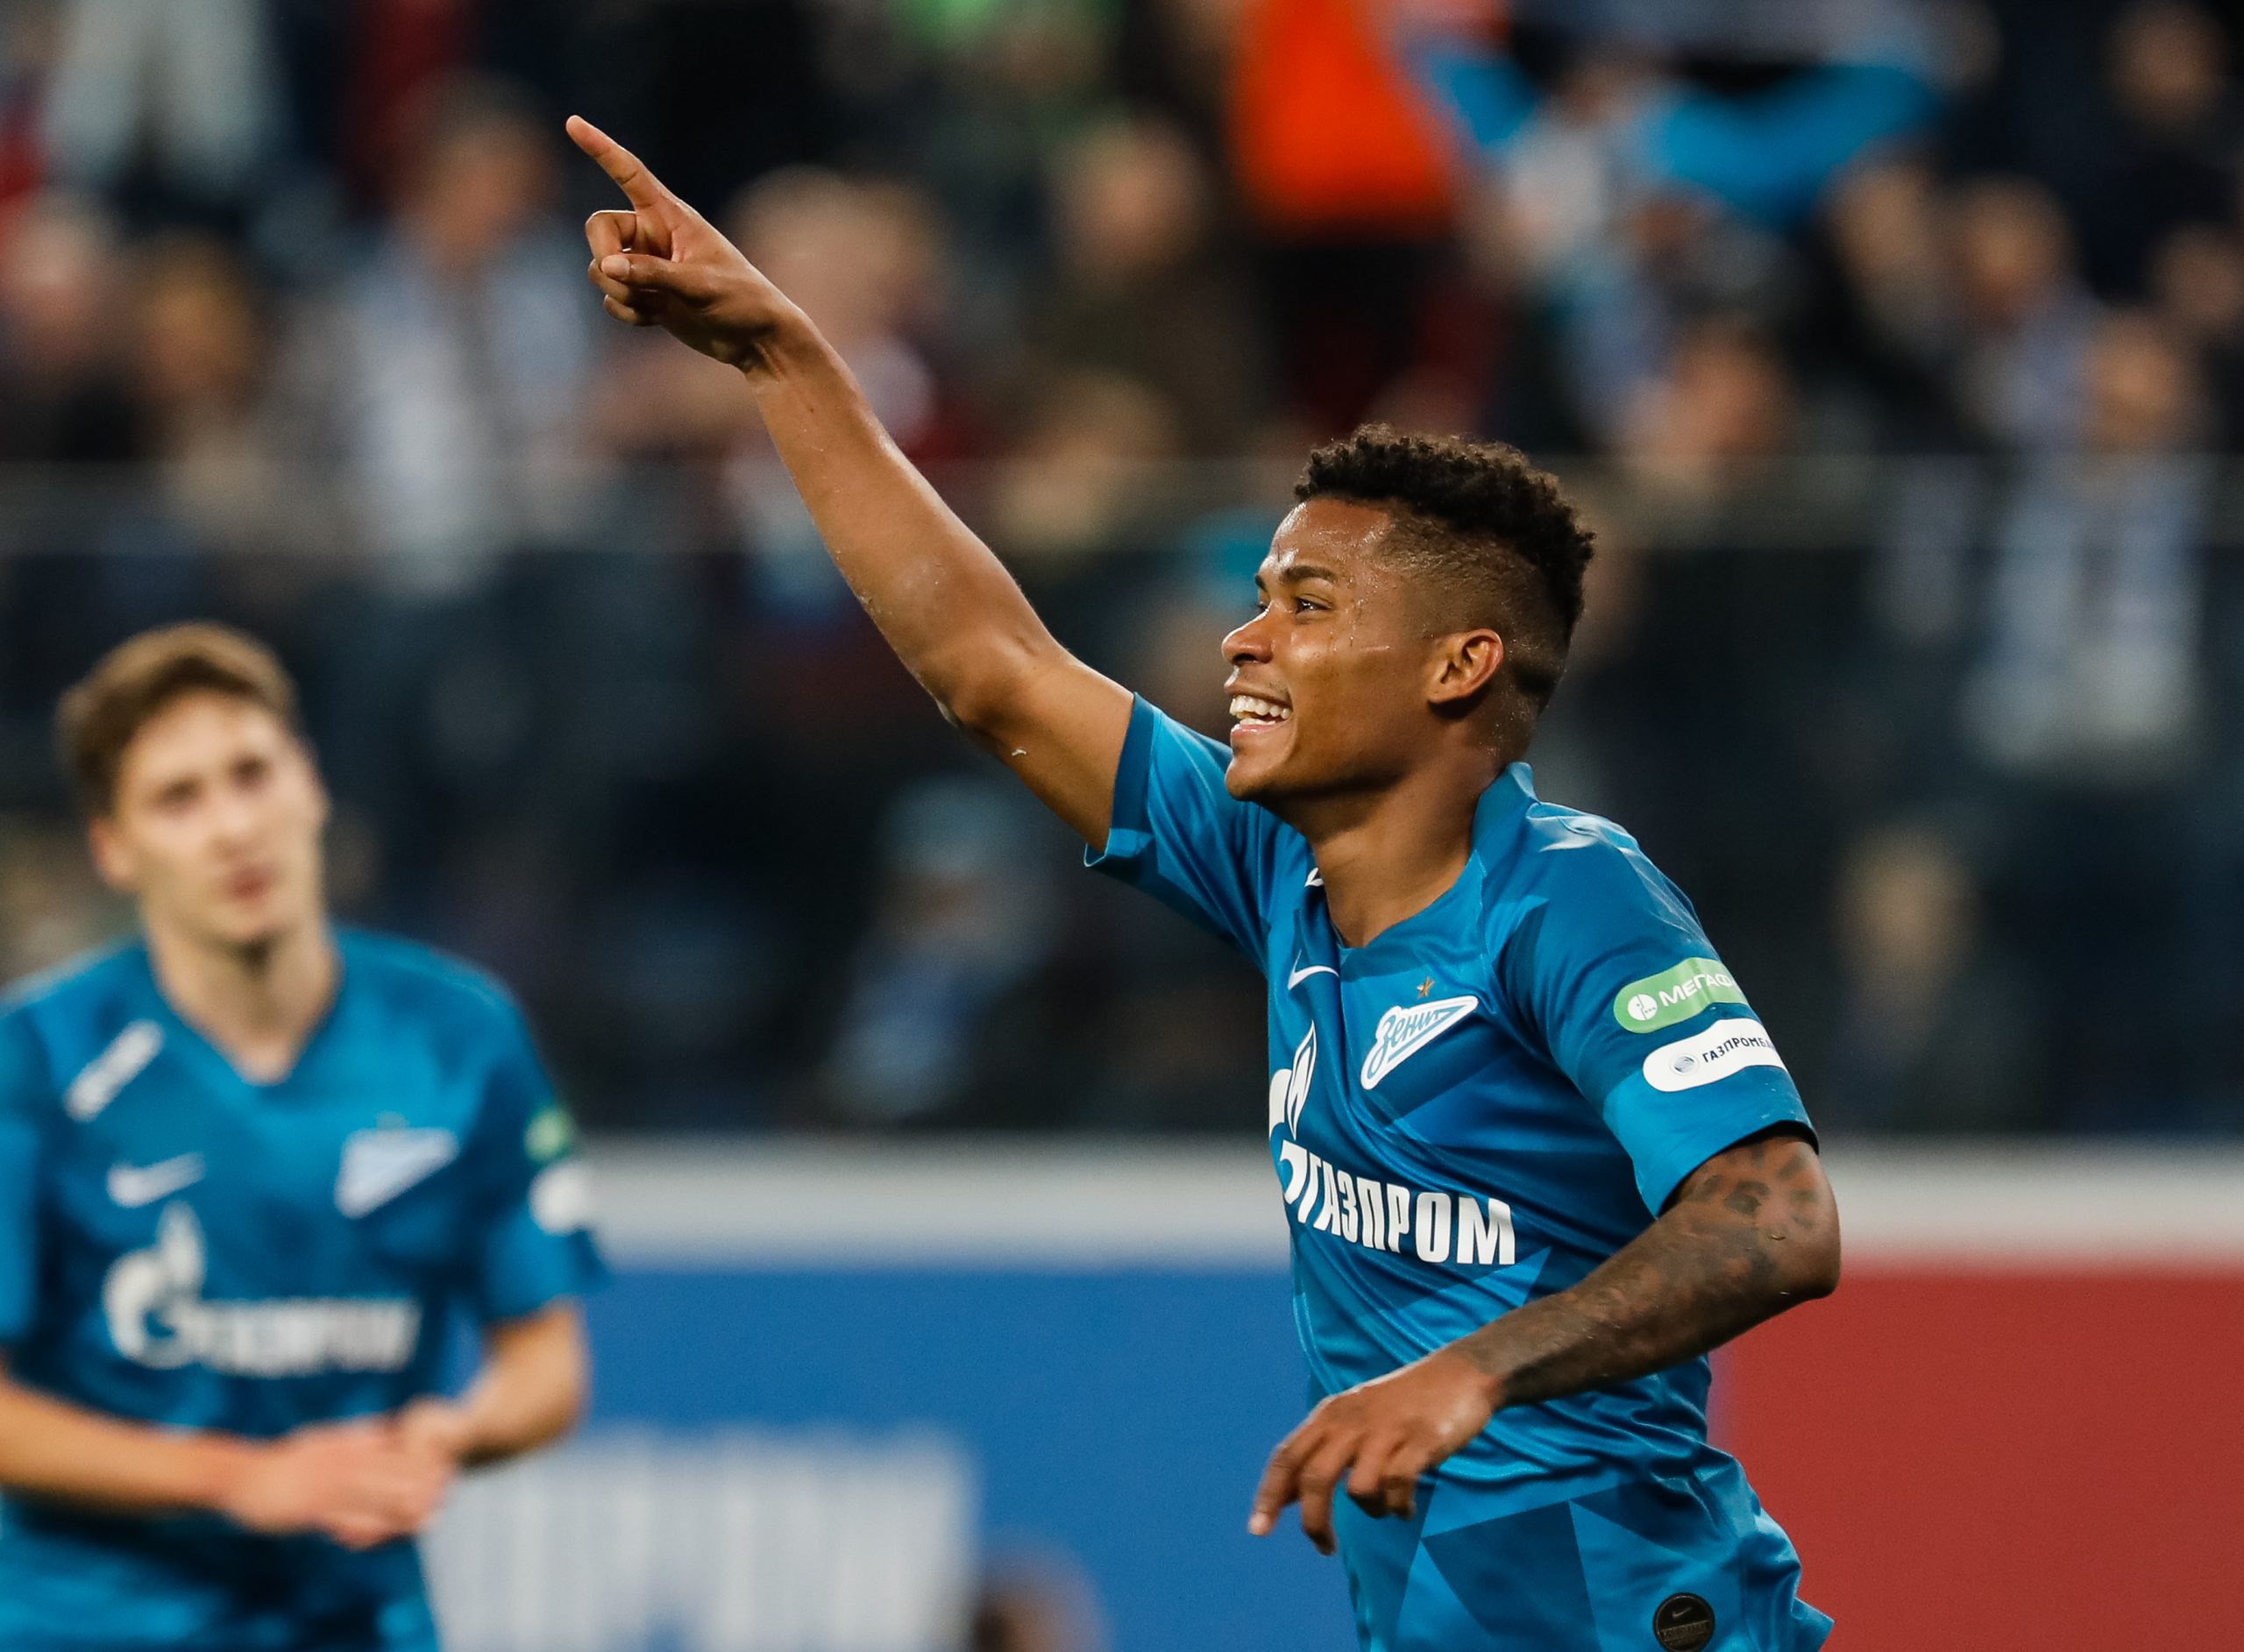 Wilmar Barrios celebrates after scoring a goal (Getty Images)